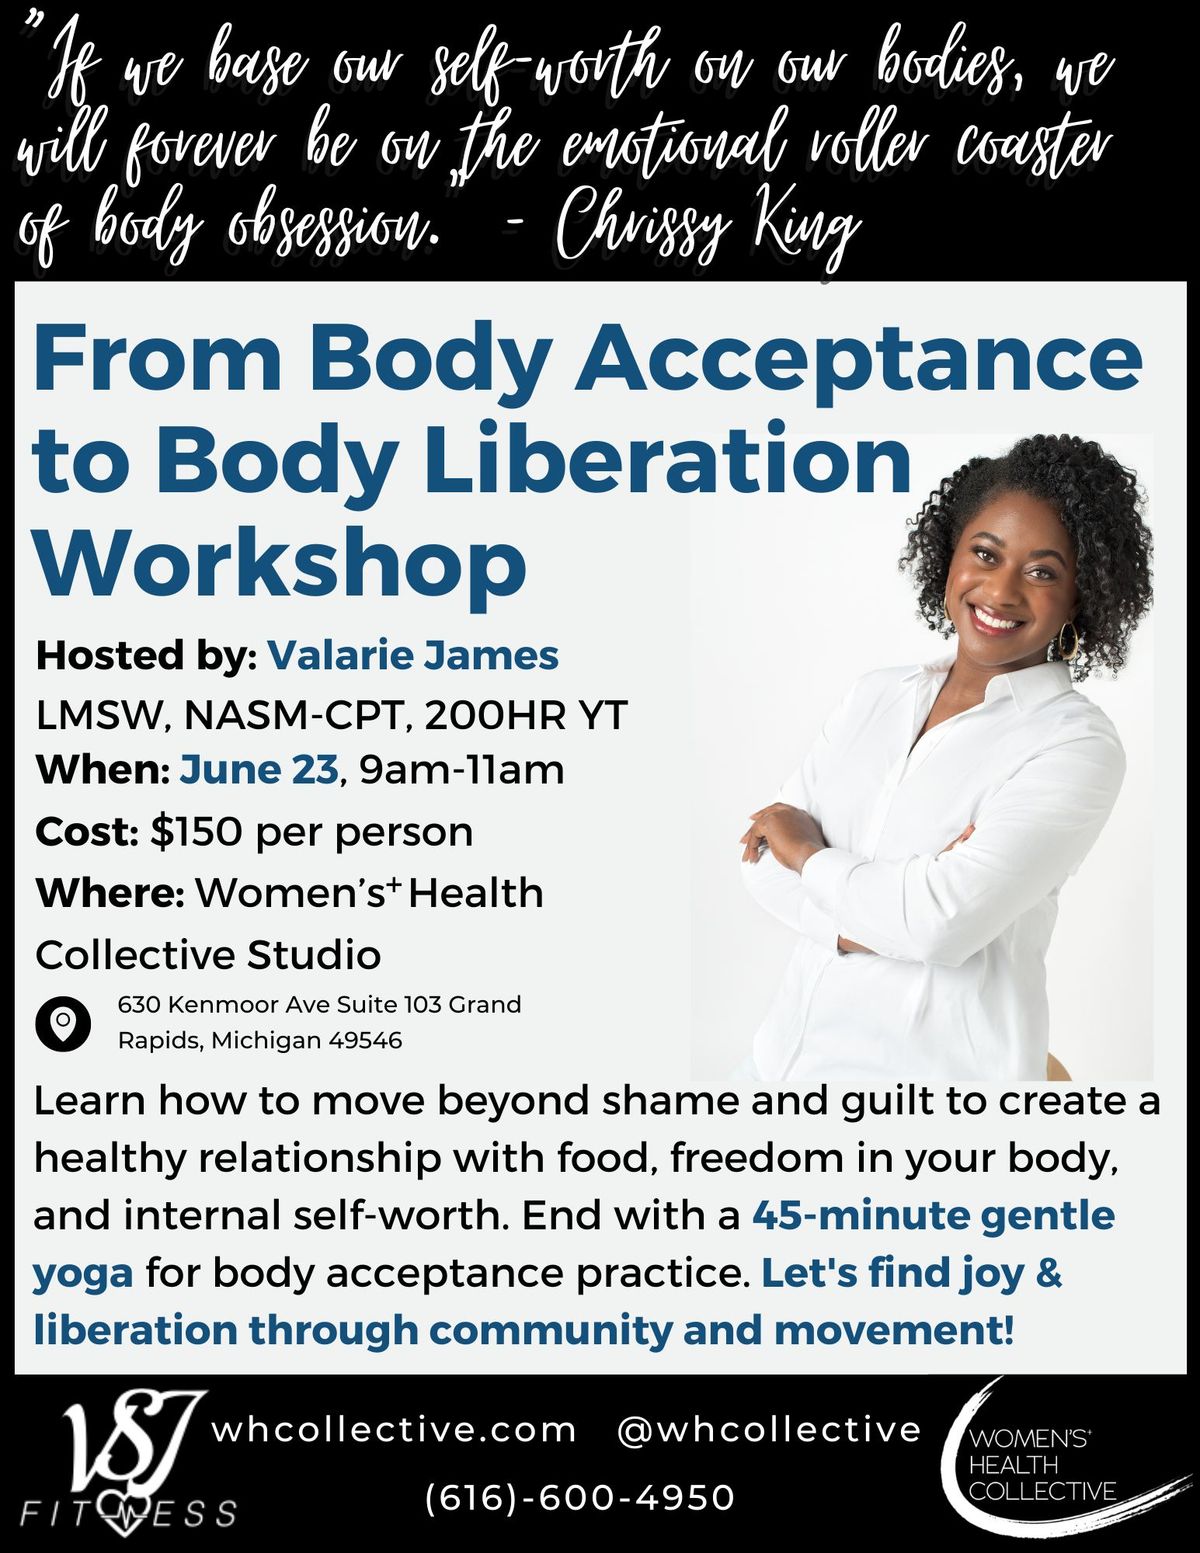 From Body Acceptance to Body Liberation Workshop